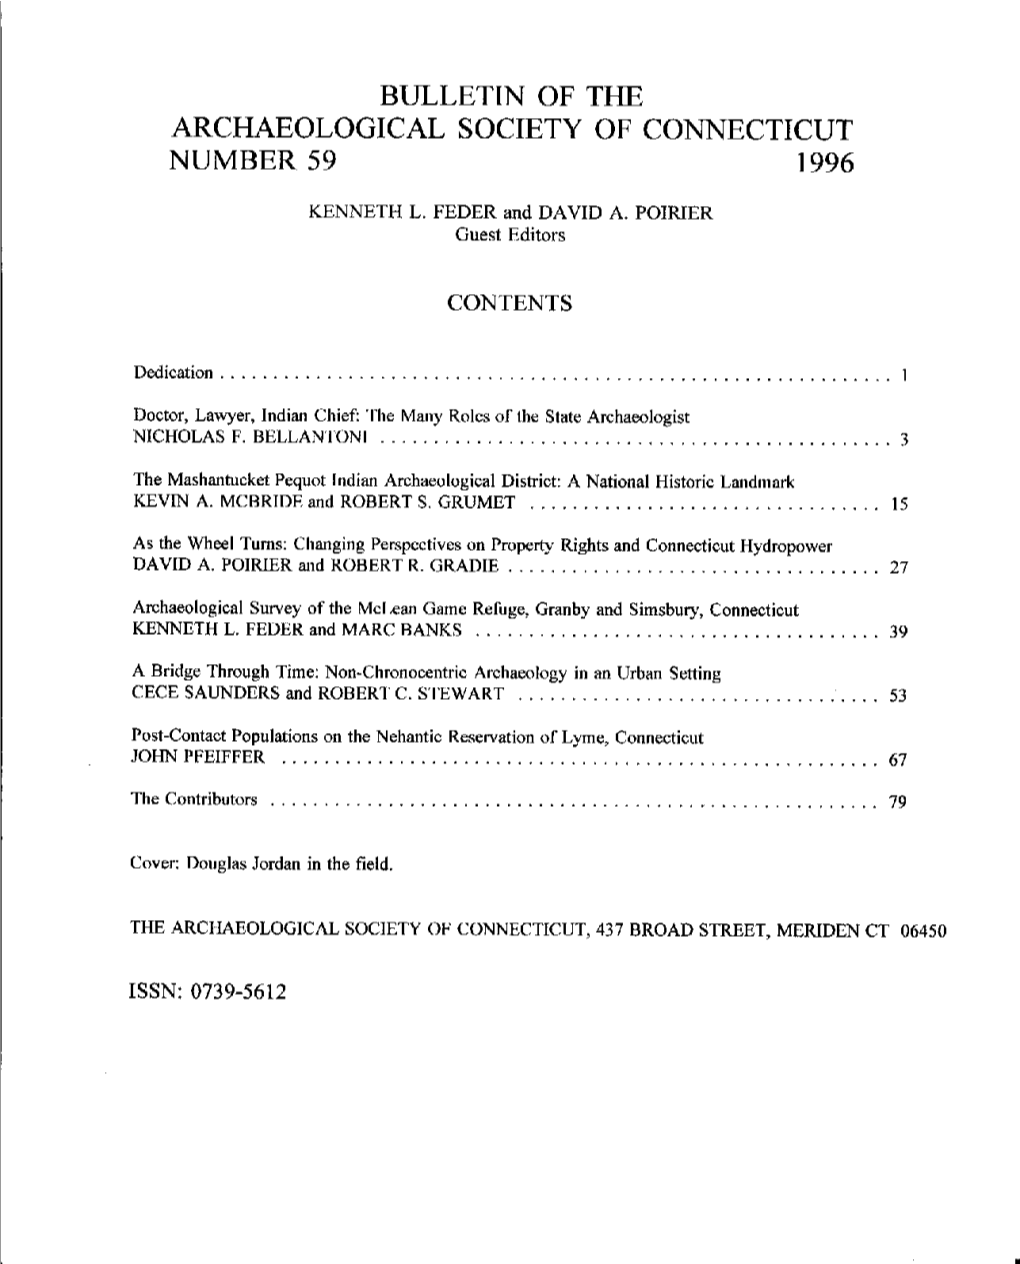 Bulletin of the Archaeological Society of Connecticut Number 59 1996